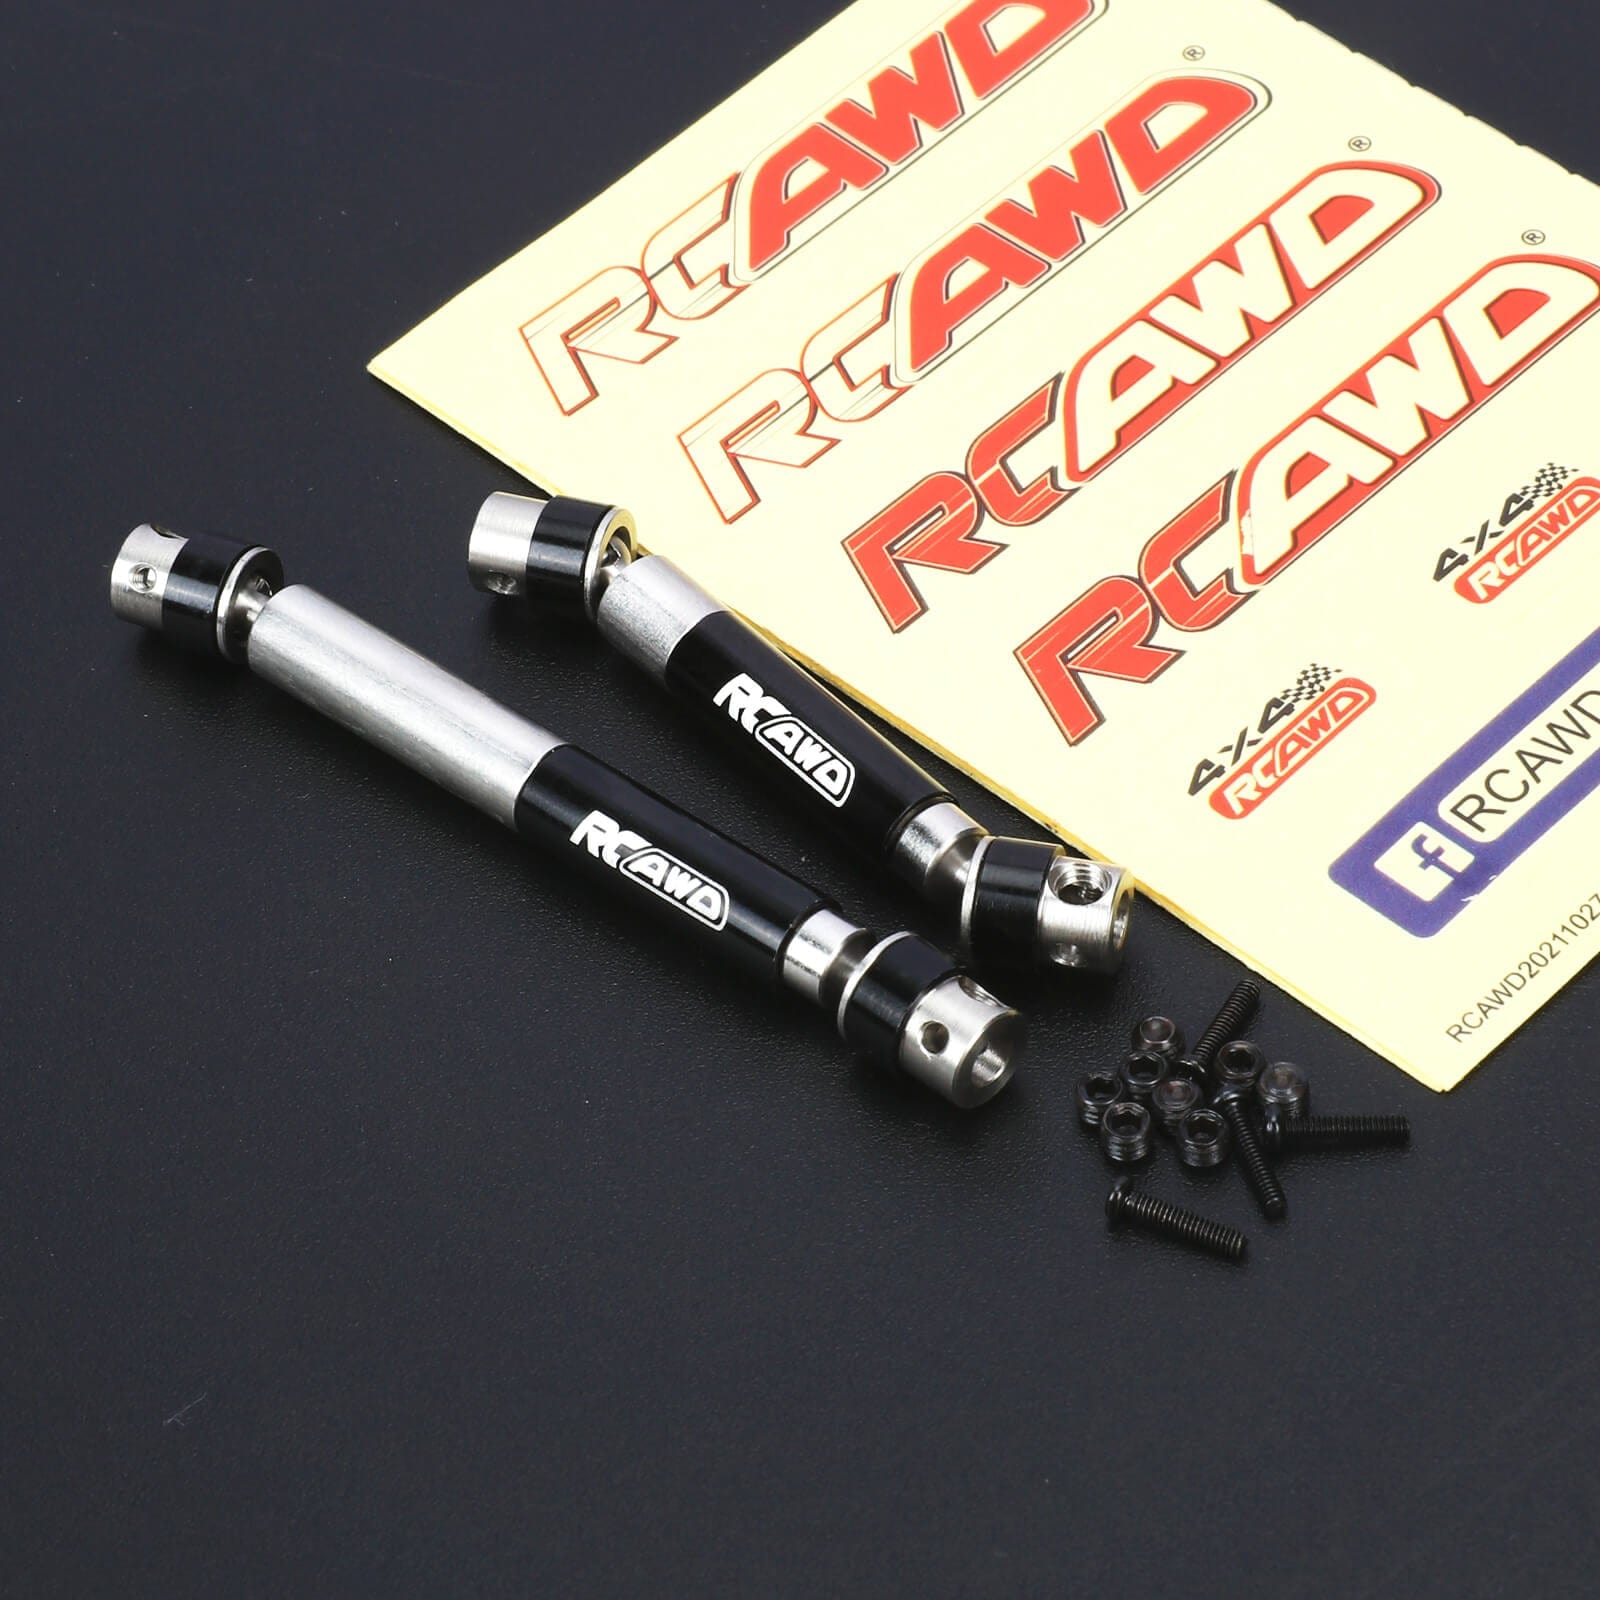 RCAWD Metal Center Driveshaft Set for Trx4m Rover Defender/Ford Bronco Upgrades - RCAWD